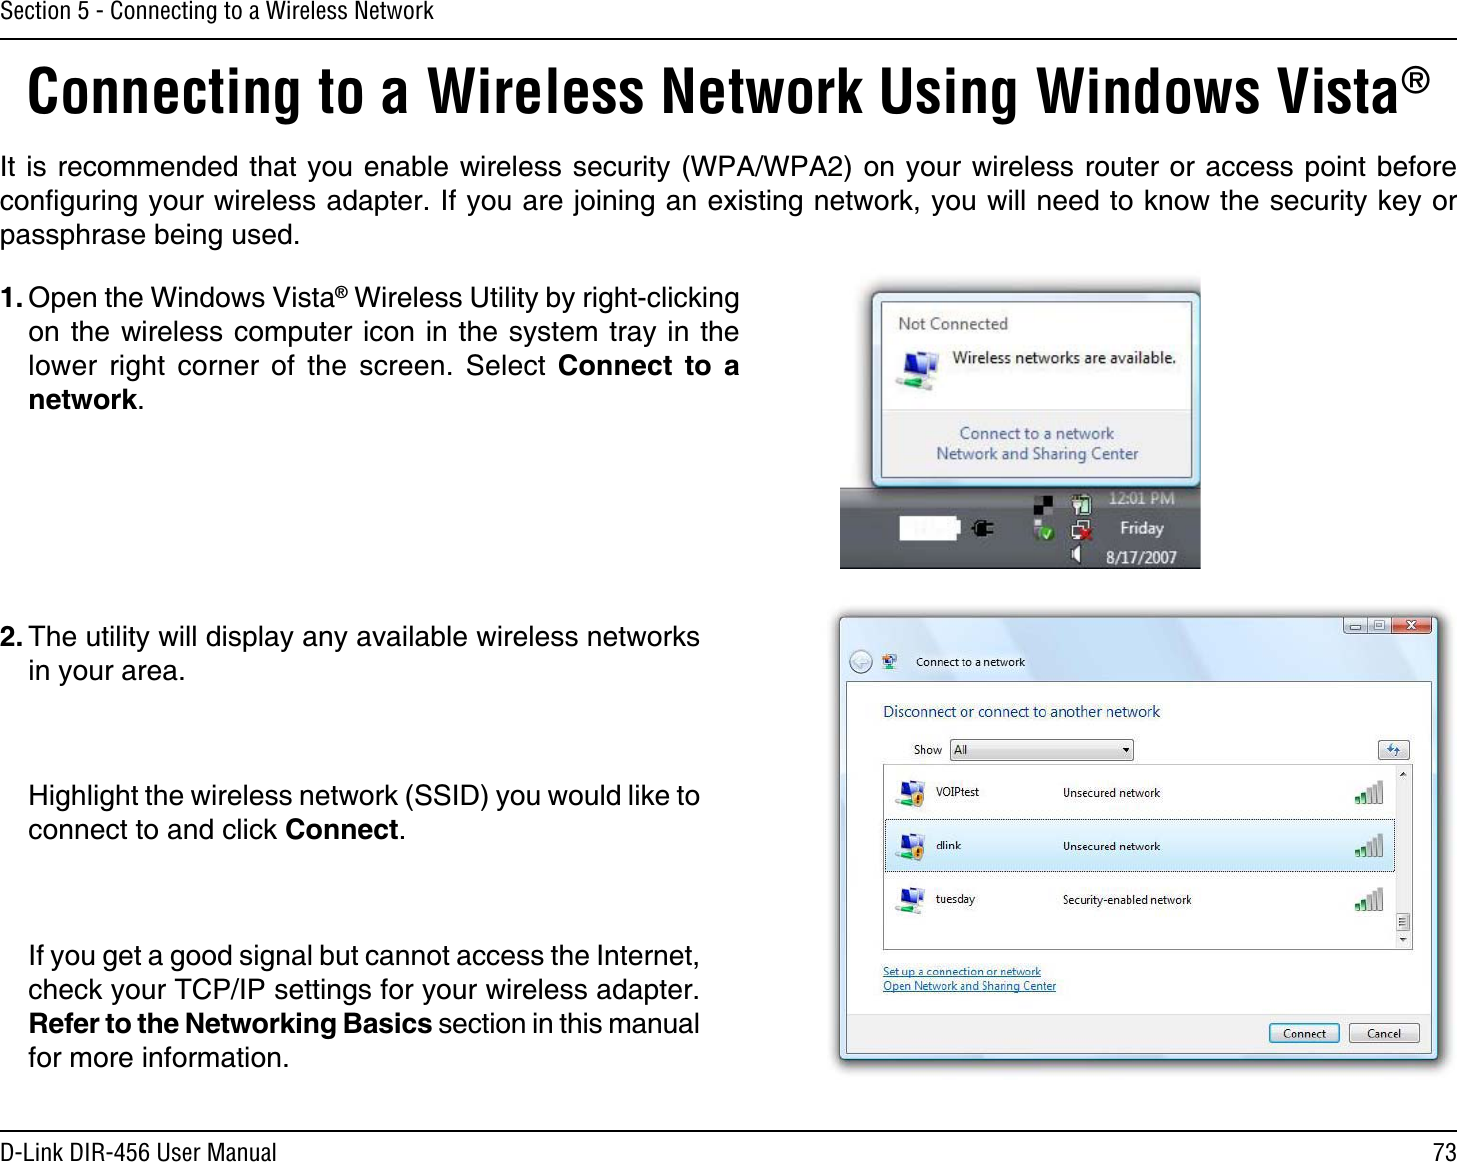 73D-Link DIR-456 User ManualSection 5 - Connecting to a Wireless NetworkConnecting to a Wireless Network Using Windows Vista® It is recommended that you enable wireless security (WPA/WPA2) on your wireless router or access point before conﬁguring your wireless adapter. If you are joining an existing network, you will need to know the security key or passphrase being used.2. The utility will display any available wireless networks in your area.  Highlight the wireless network (SSID) you would like to connect to and click Connect.  If you get a good signal but cannot access the Internet, check your TCP/IP settings for your wireless adapter. Refer to the Networking Basics section in this manual for more information.1. Open the Windows Vista® Wireless Utility by right-clicking on the wireless computer icon in the system tray in the lower right corner of the screen. Select Connect to a network. 